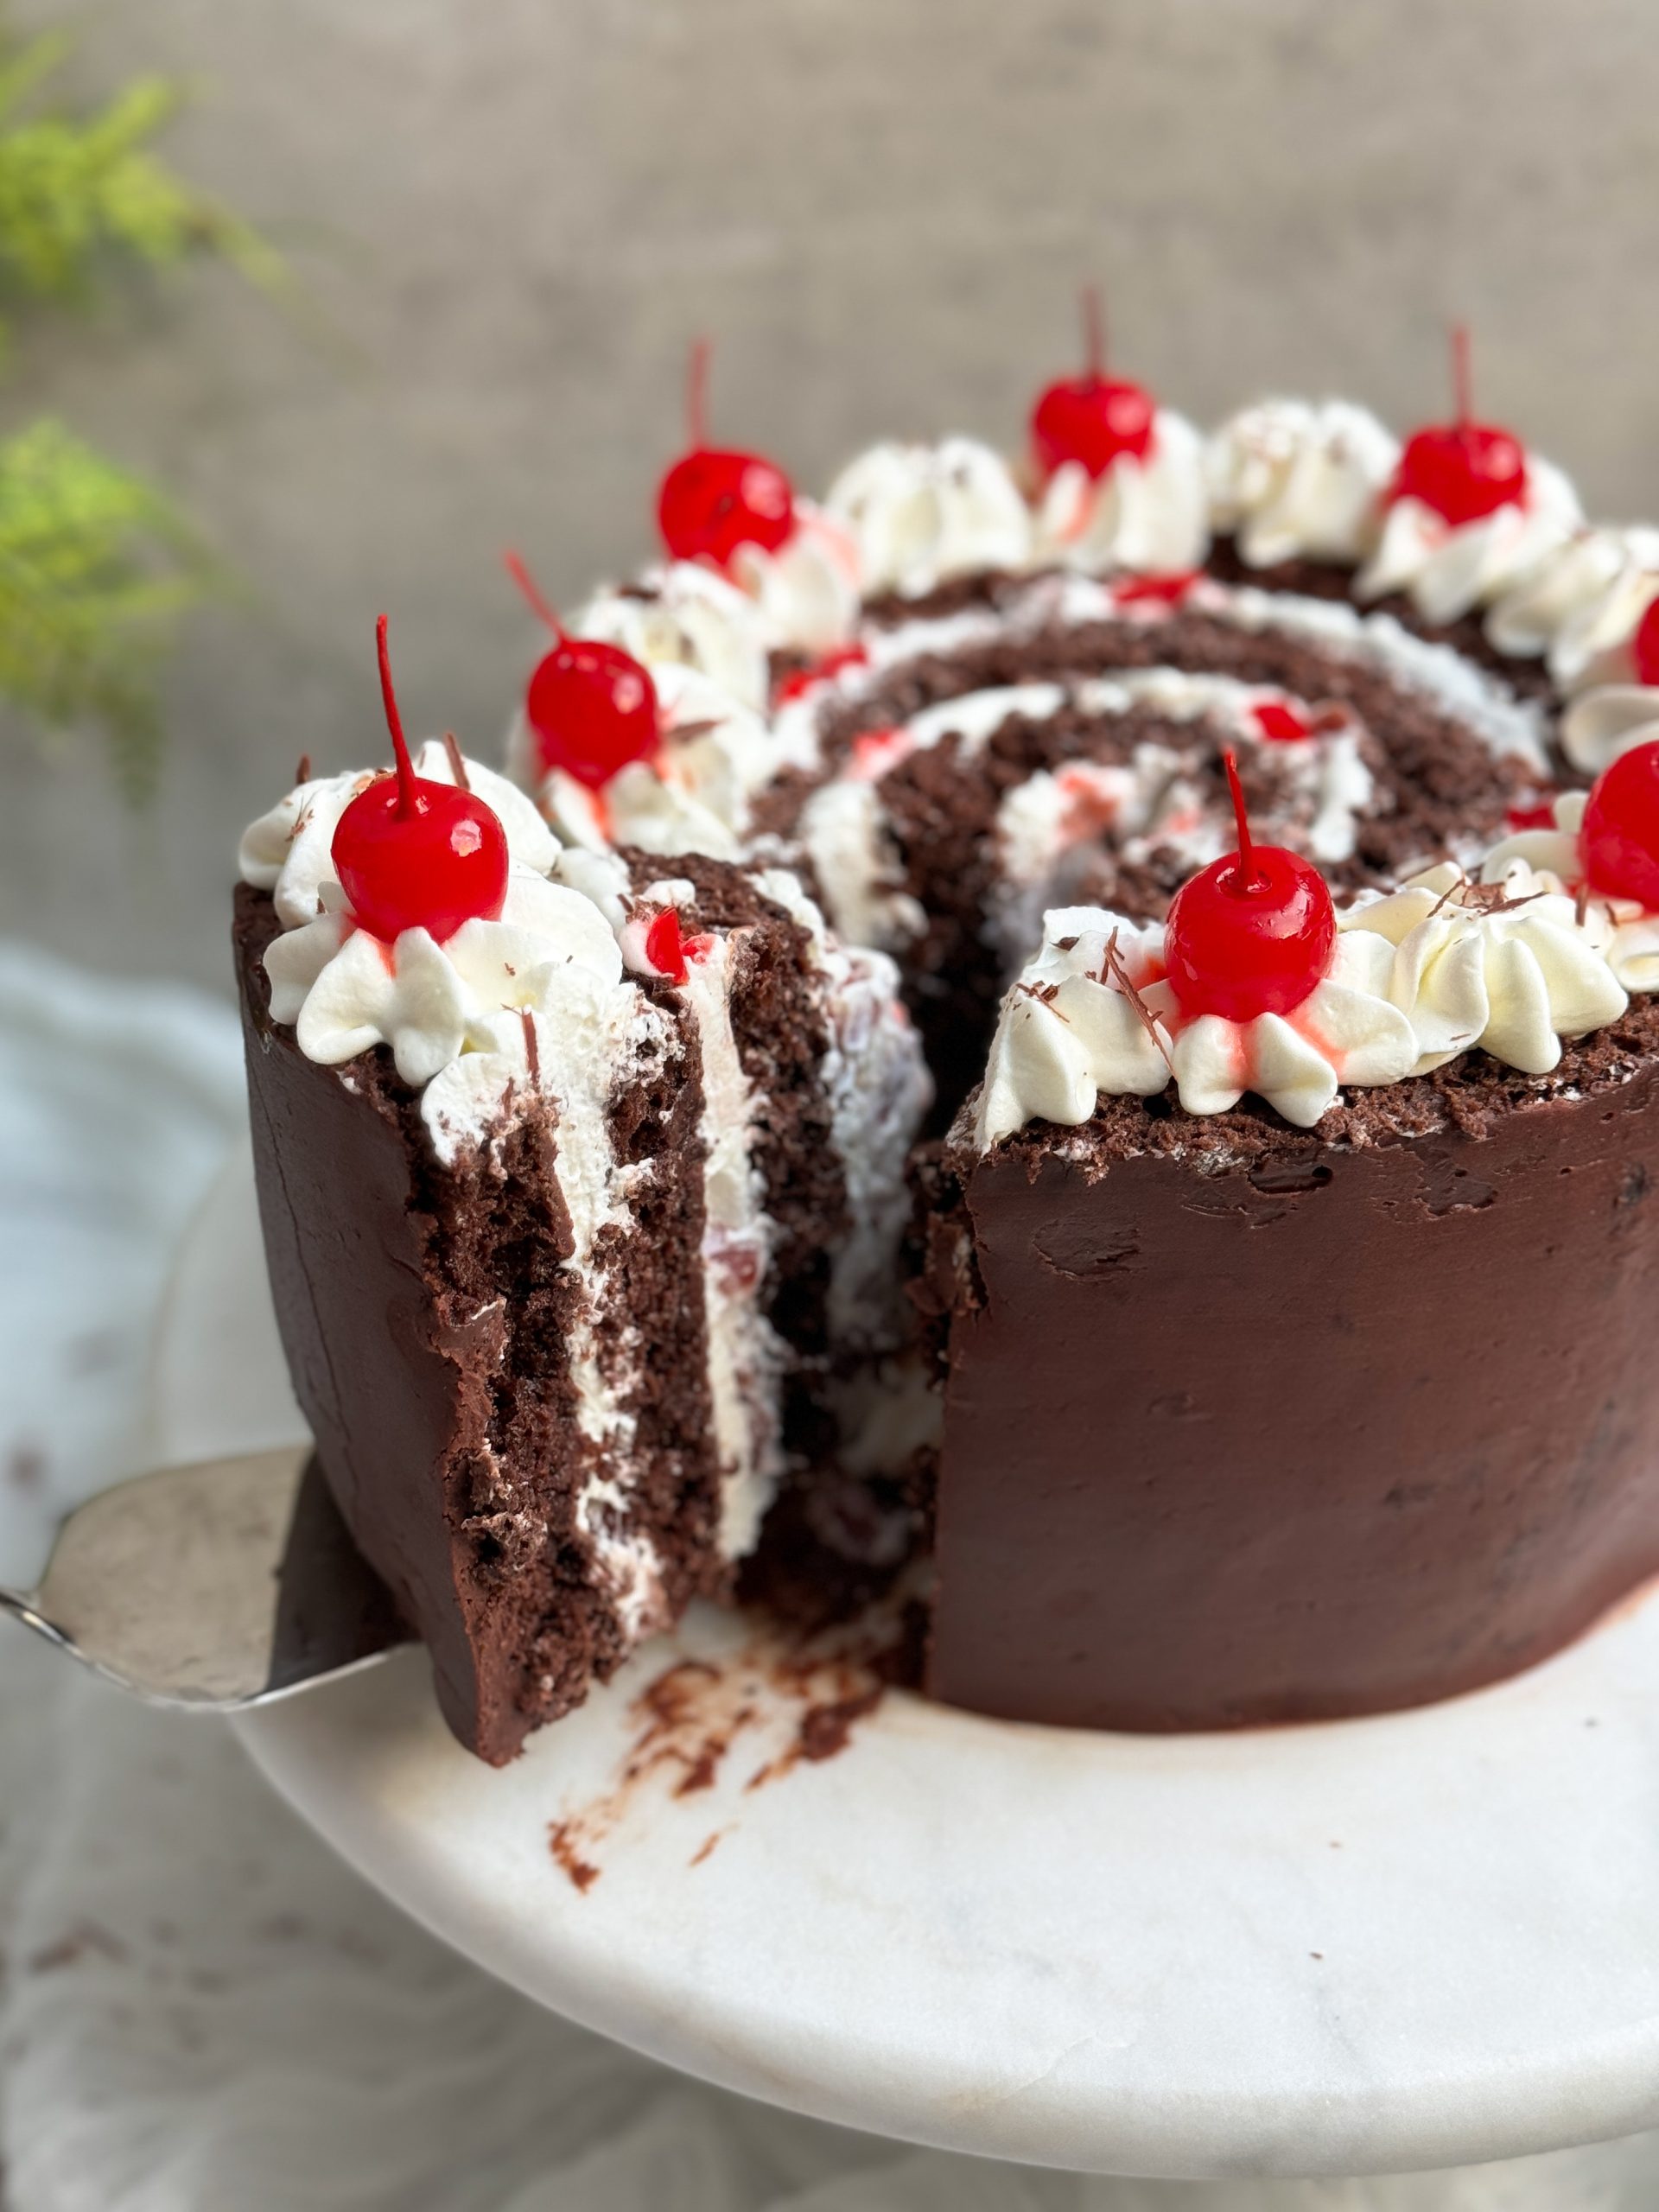 vertical black forest swiss roll cake on a marble serving stand. cake is coated in ganache with a swirl on top. a slice is being pulled out to reveal vertical layers of cake and whipped cream with cherries inside and on top. close up picture